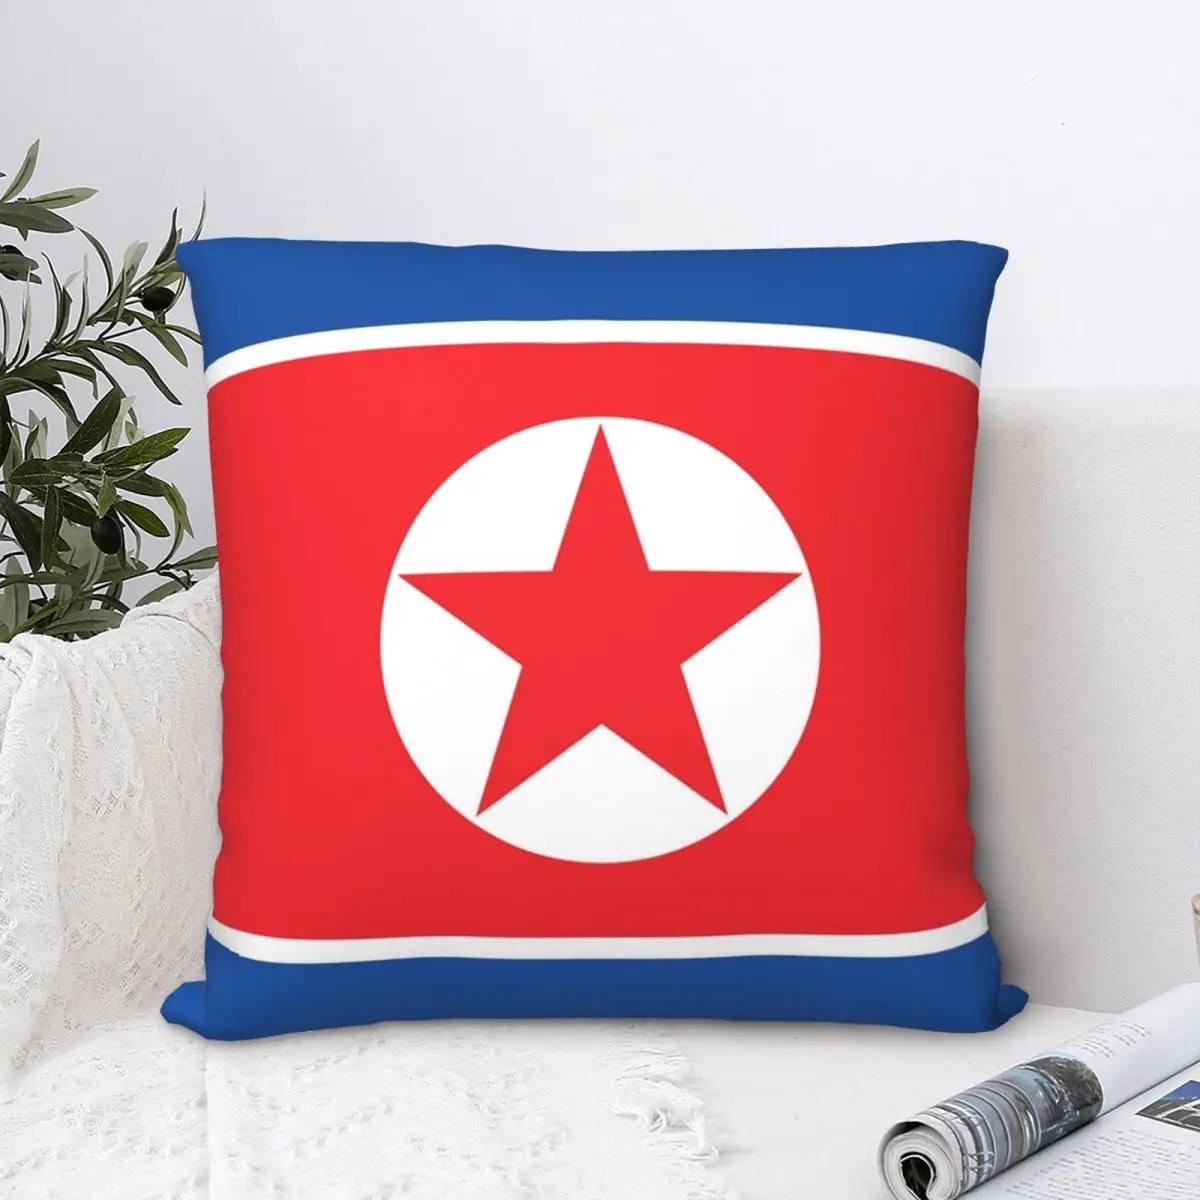 

North Korea Flag Square Pillowcase Cushion Cover funny Home Decorative Pillow Case for Bed Nordic 45*45cm